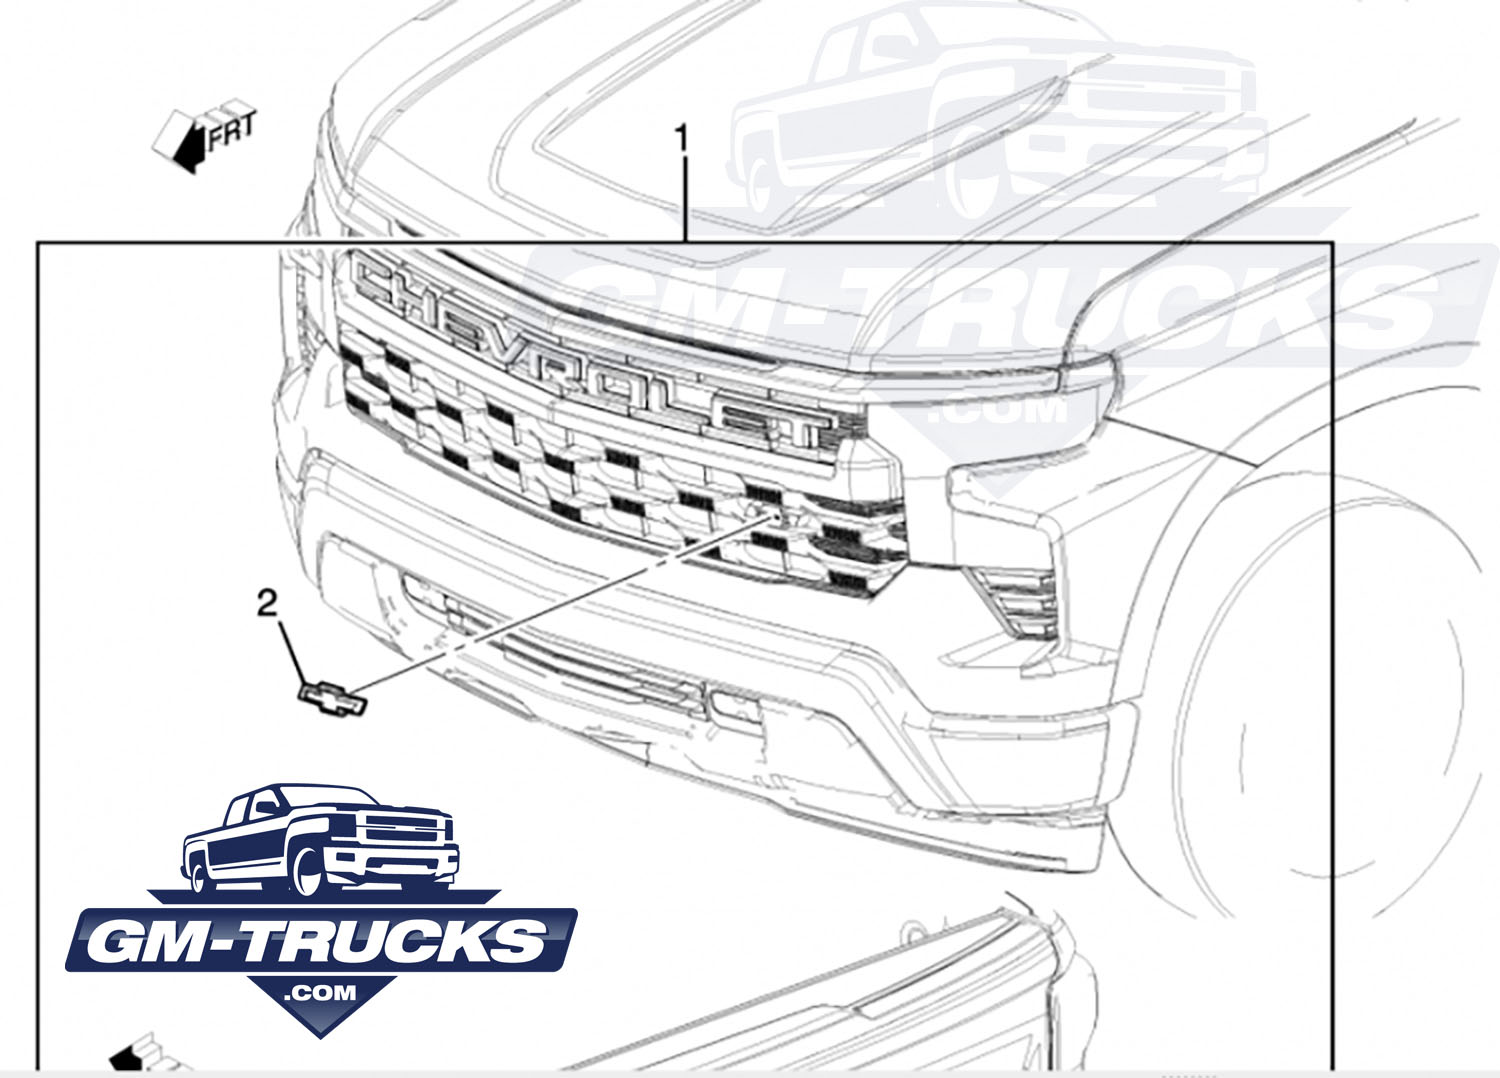 The new redesigned front end of the Chevy Silverado, leaked by a GM parts catalogue